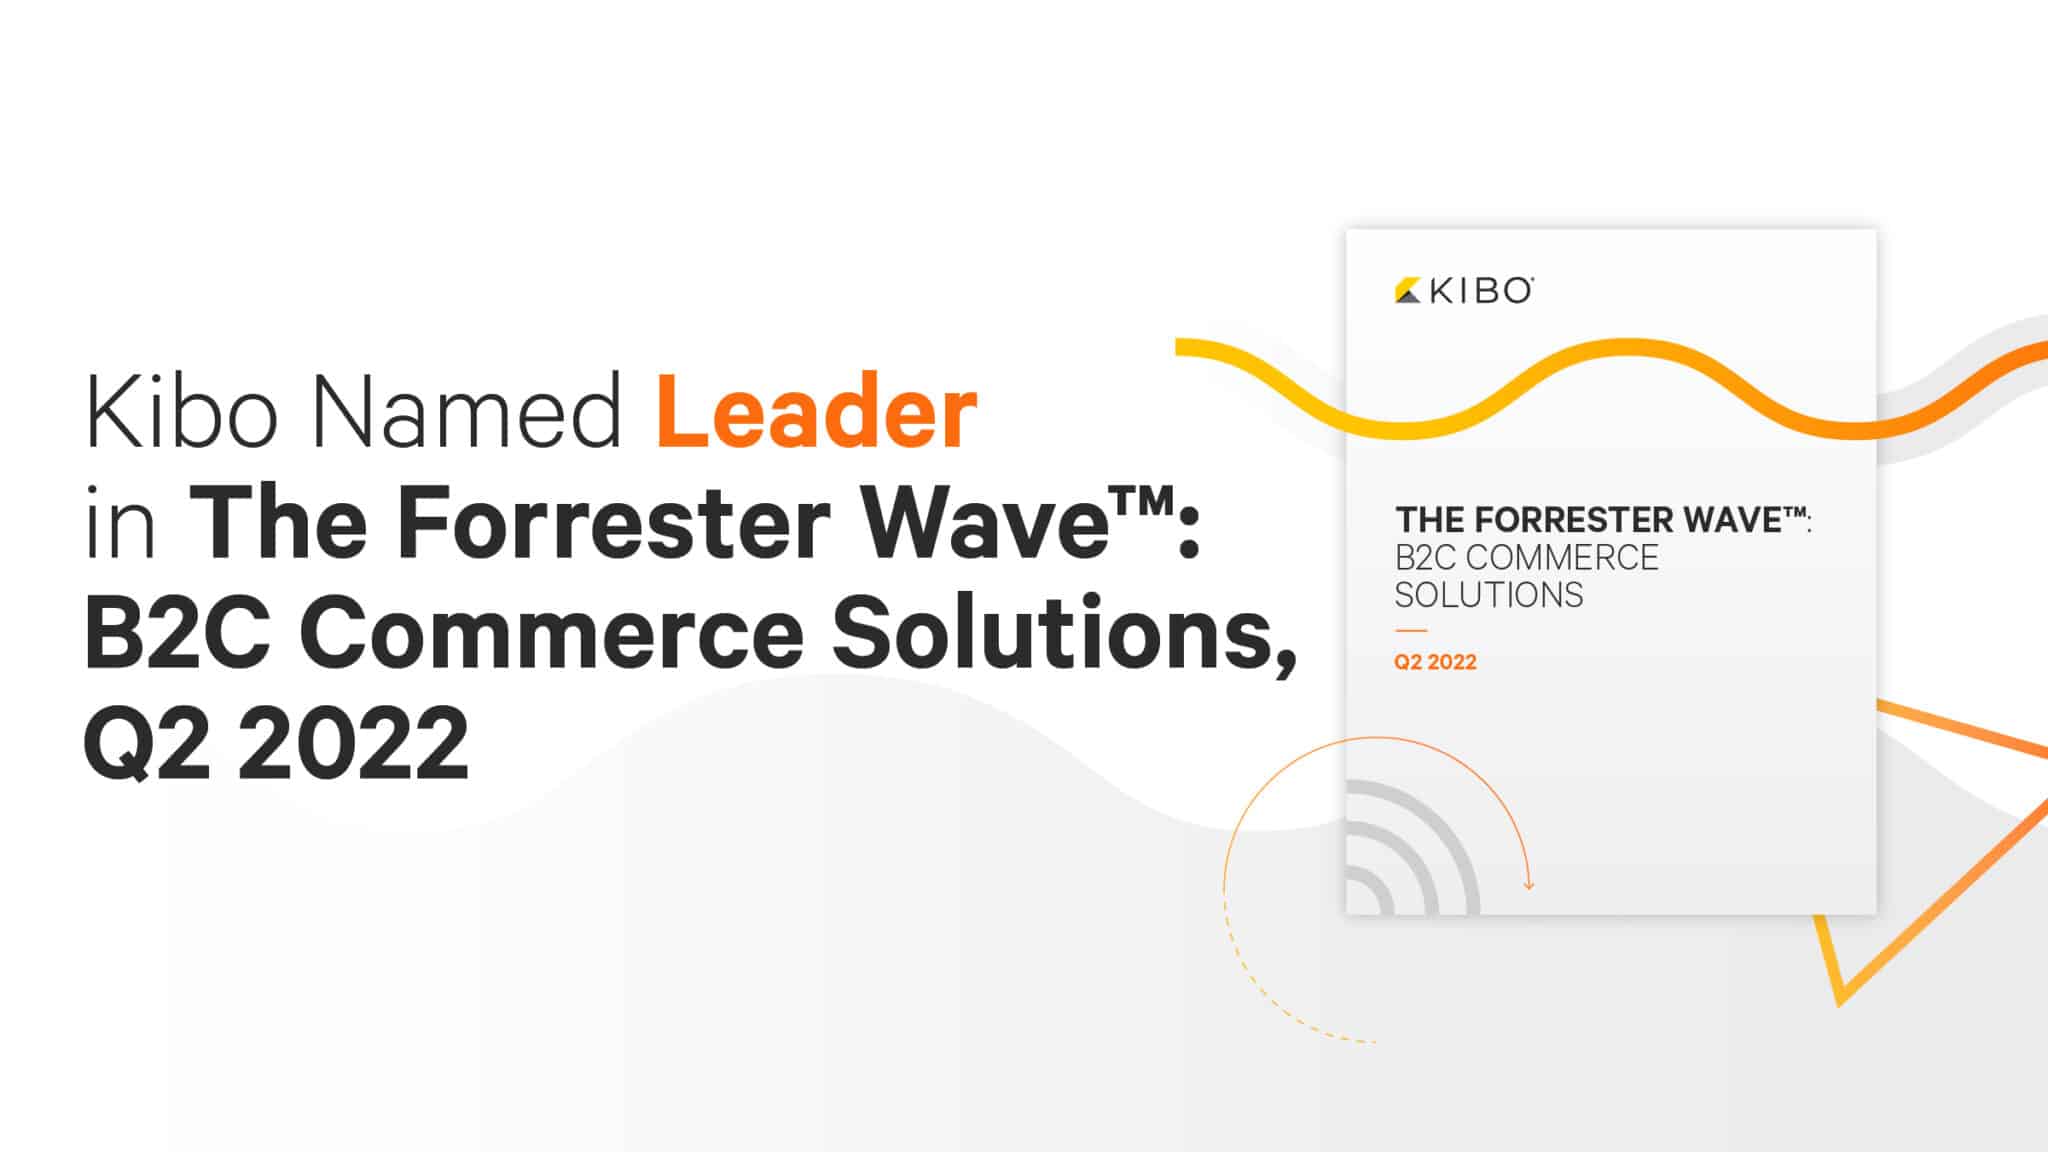  /></noscript></h2>
<h2>Kibo Recently Named a Leader in B2C Commerce Solutions Report by Forrester Research</h2>
<p><span data-contrast=